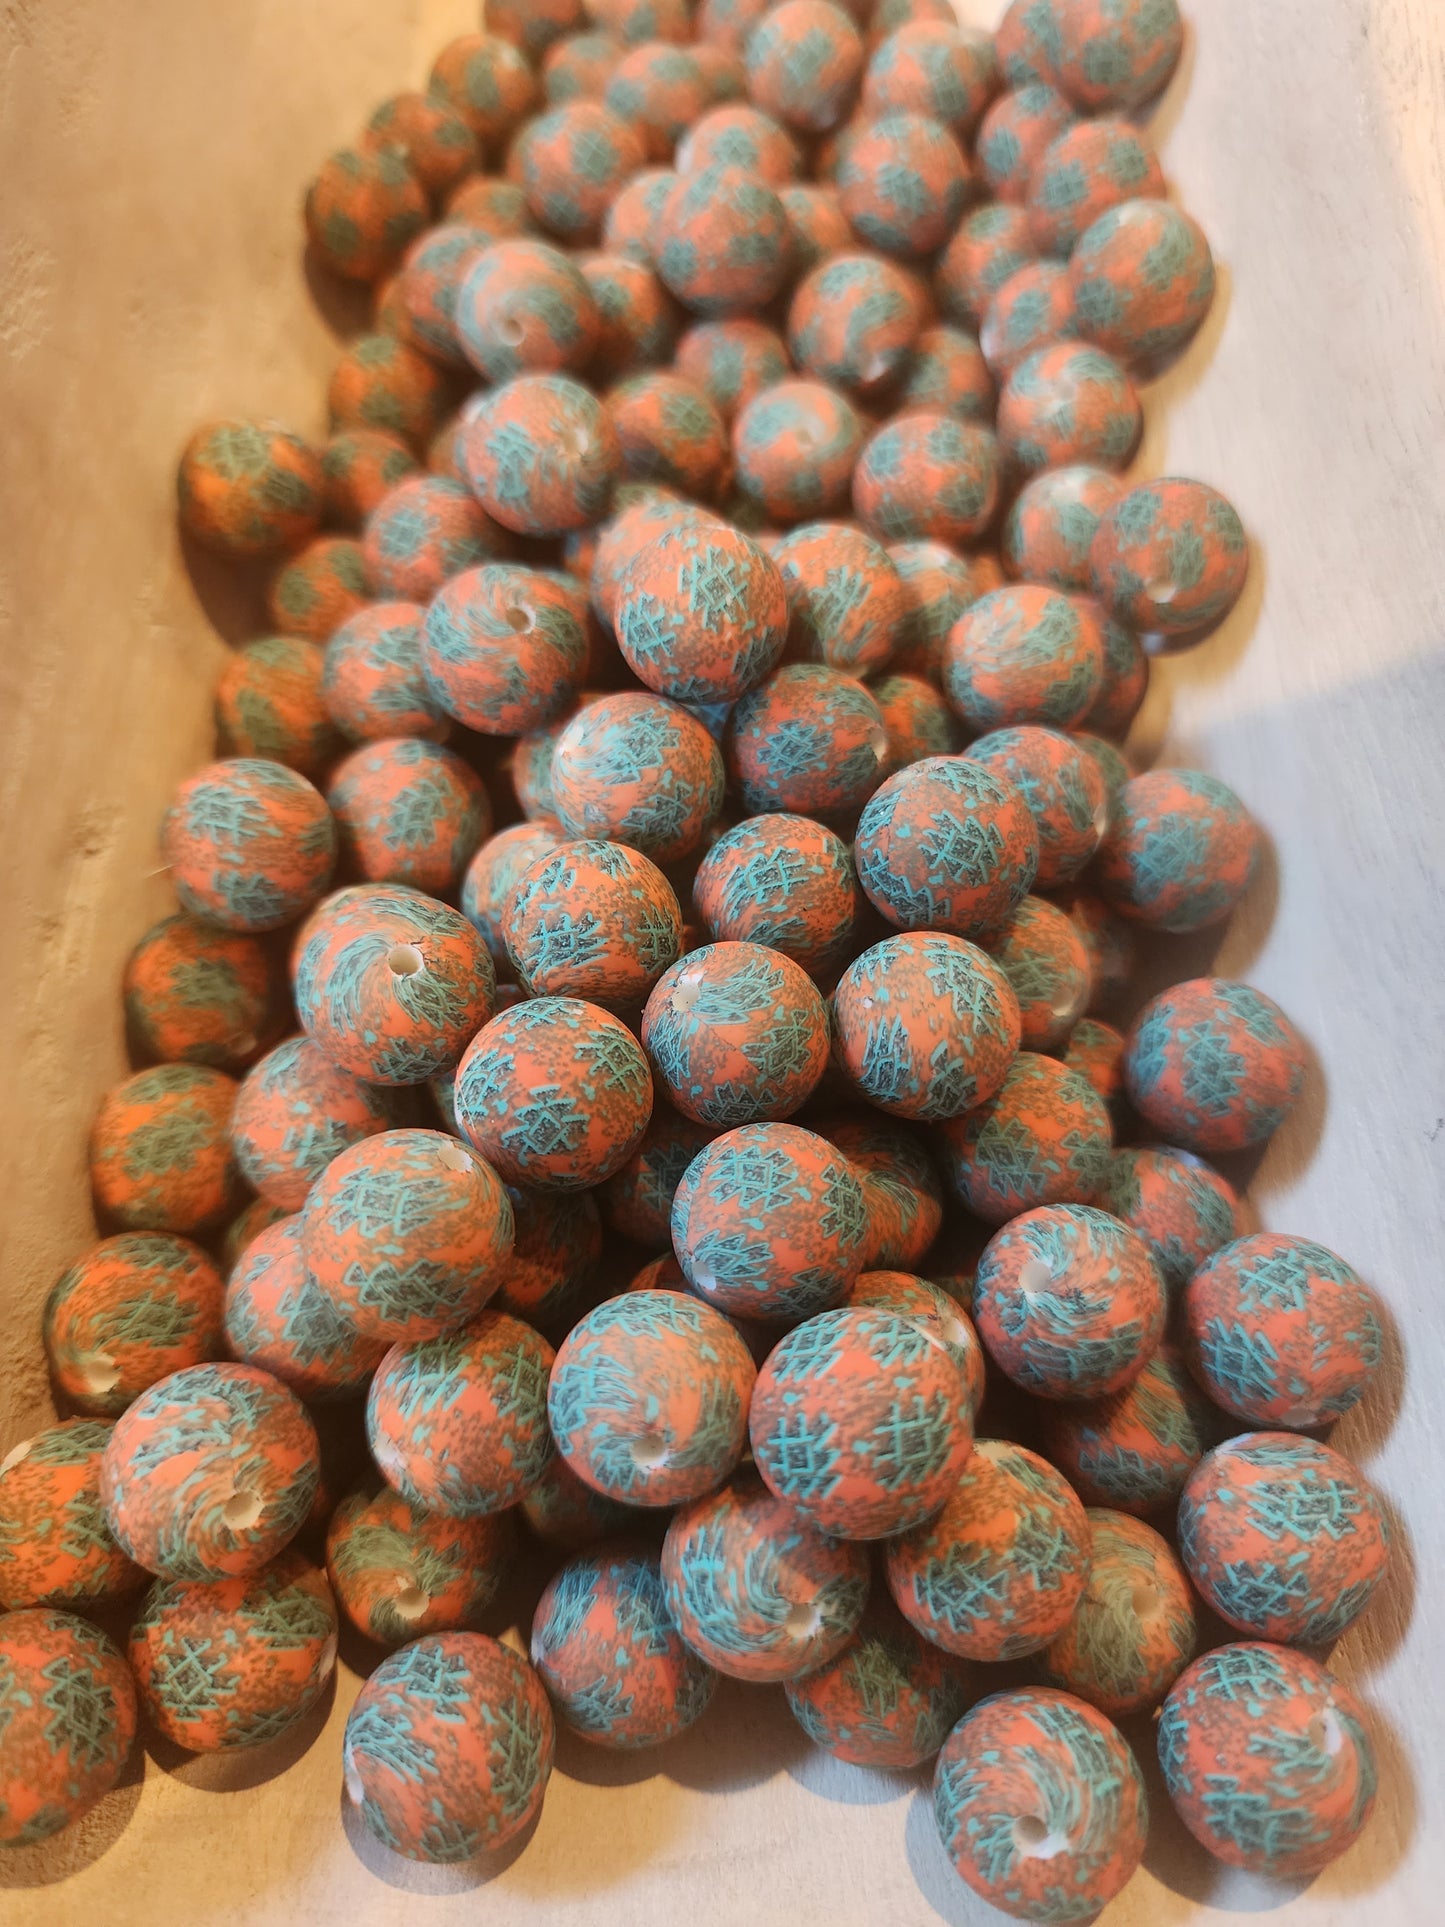 New rust turquoise aztec prints and rust black teal aztec prints 15mm and hexagons